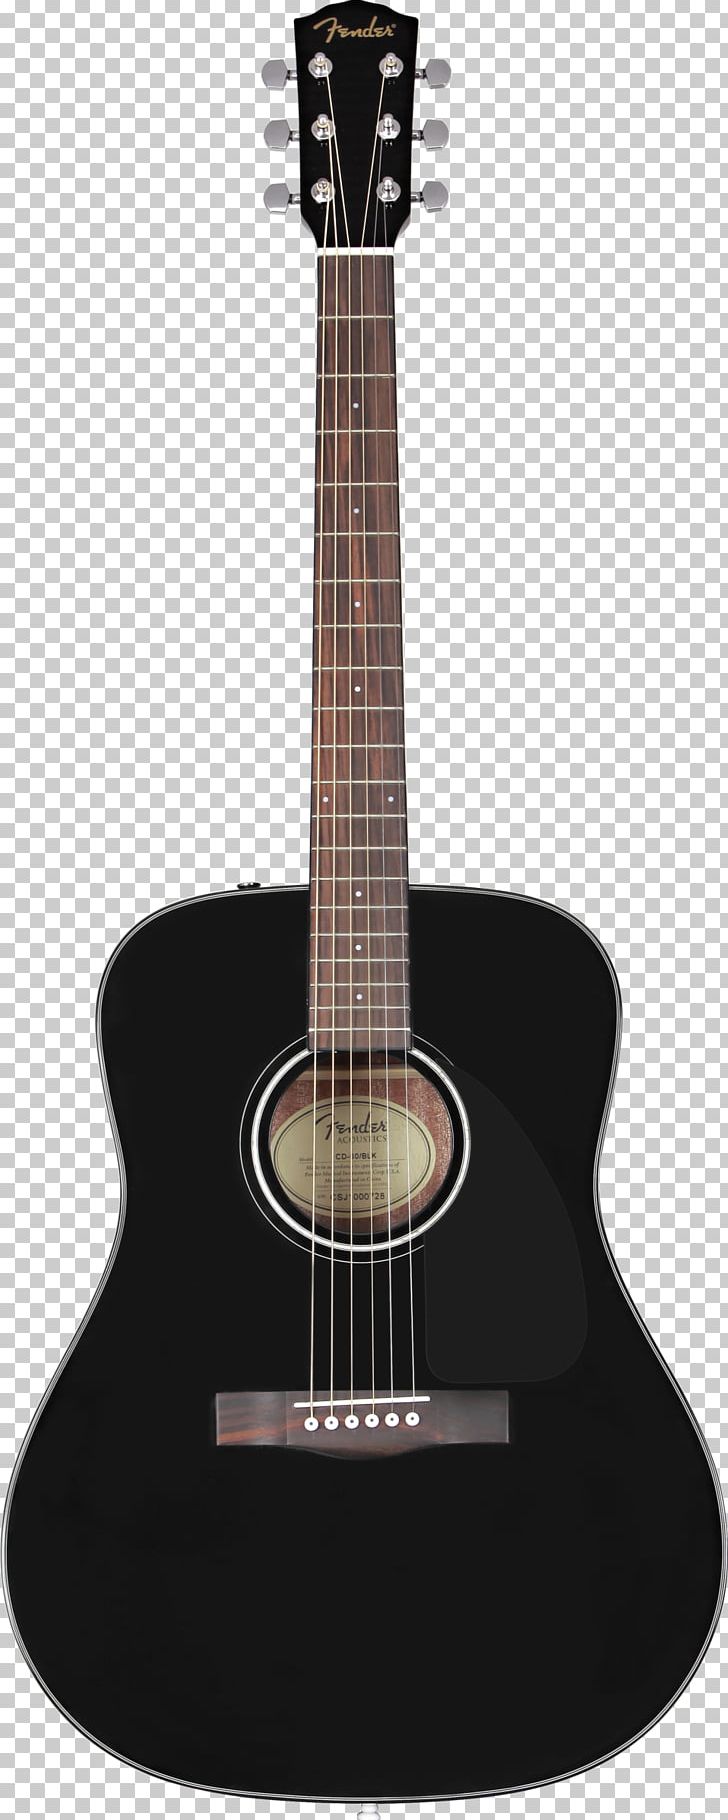 Dreadnought Acoustic Guitar Cutaway Acoustic-electric Guitar Classical Guitar PNG, Clipart, Acoustic Electric Guitar, Classical Guitar, Cuatro, Cutaway, Guitar Accessory Free PNG Download